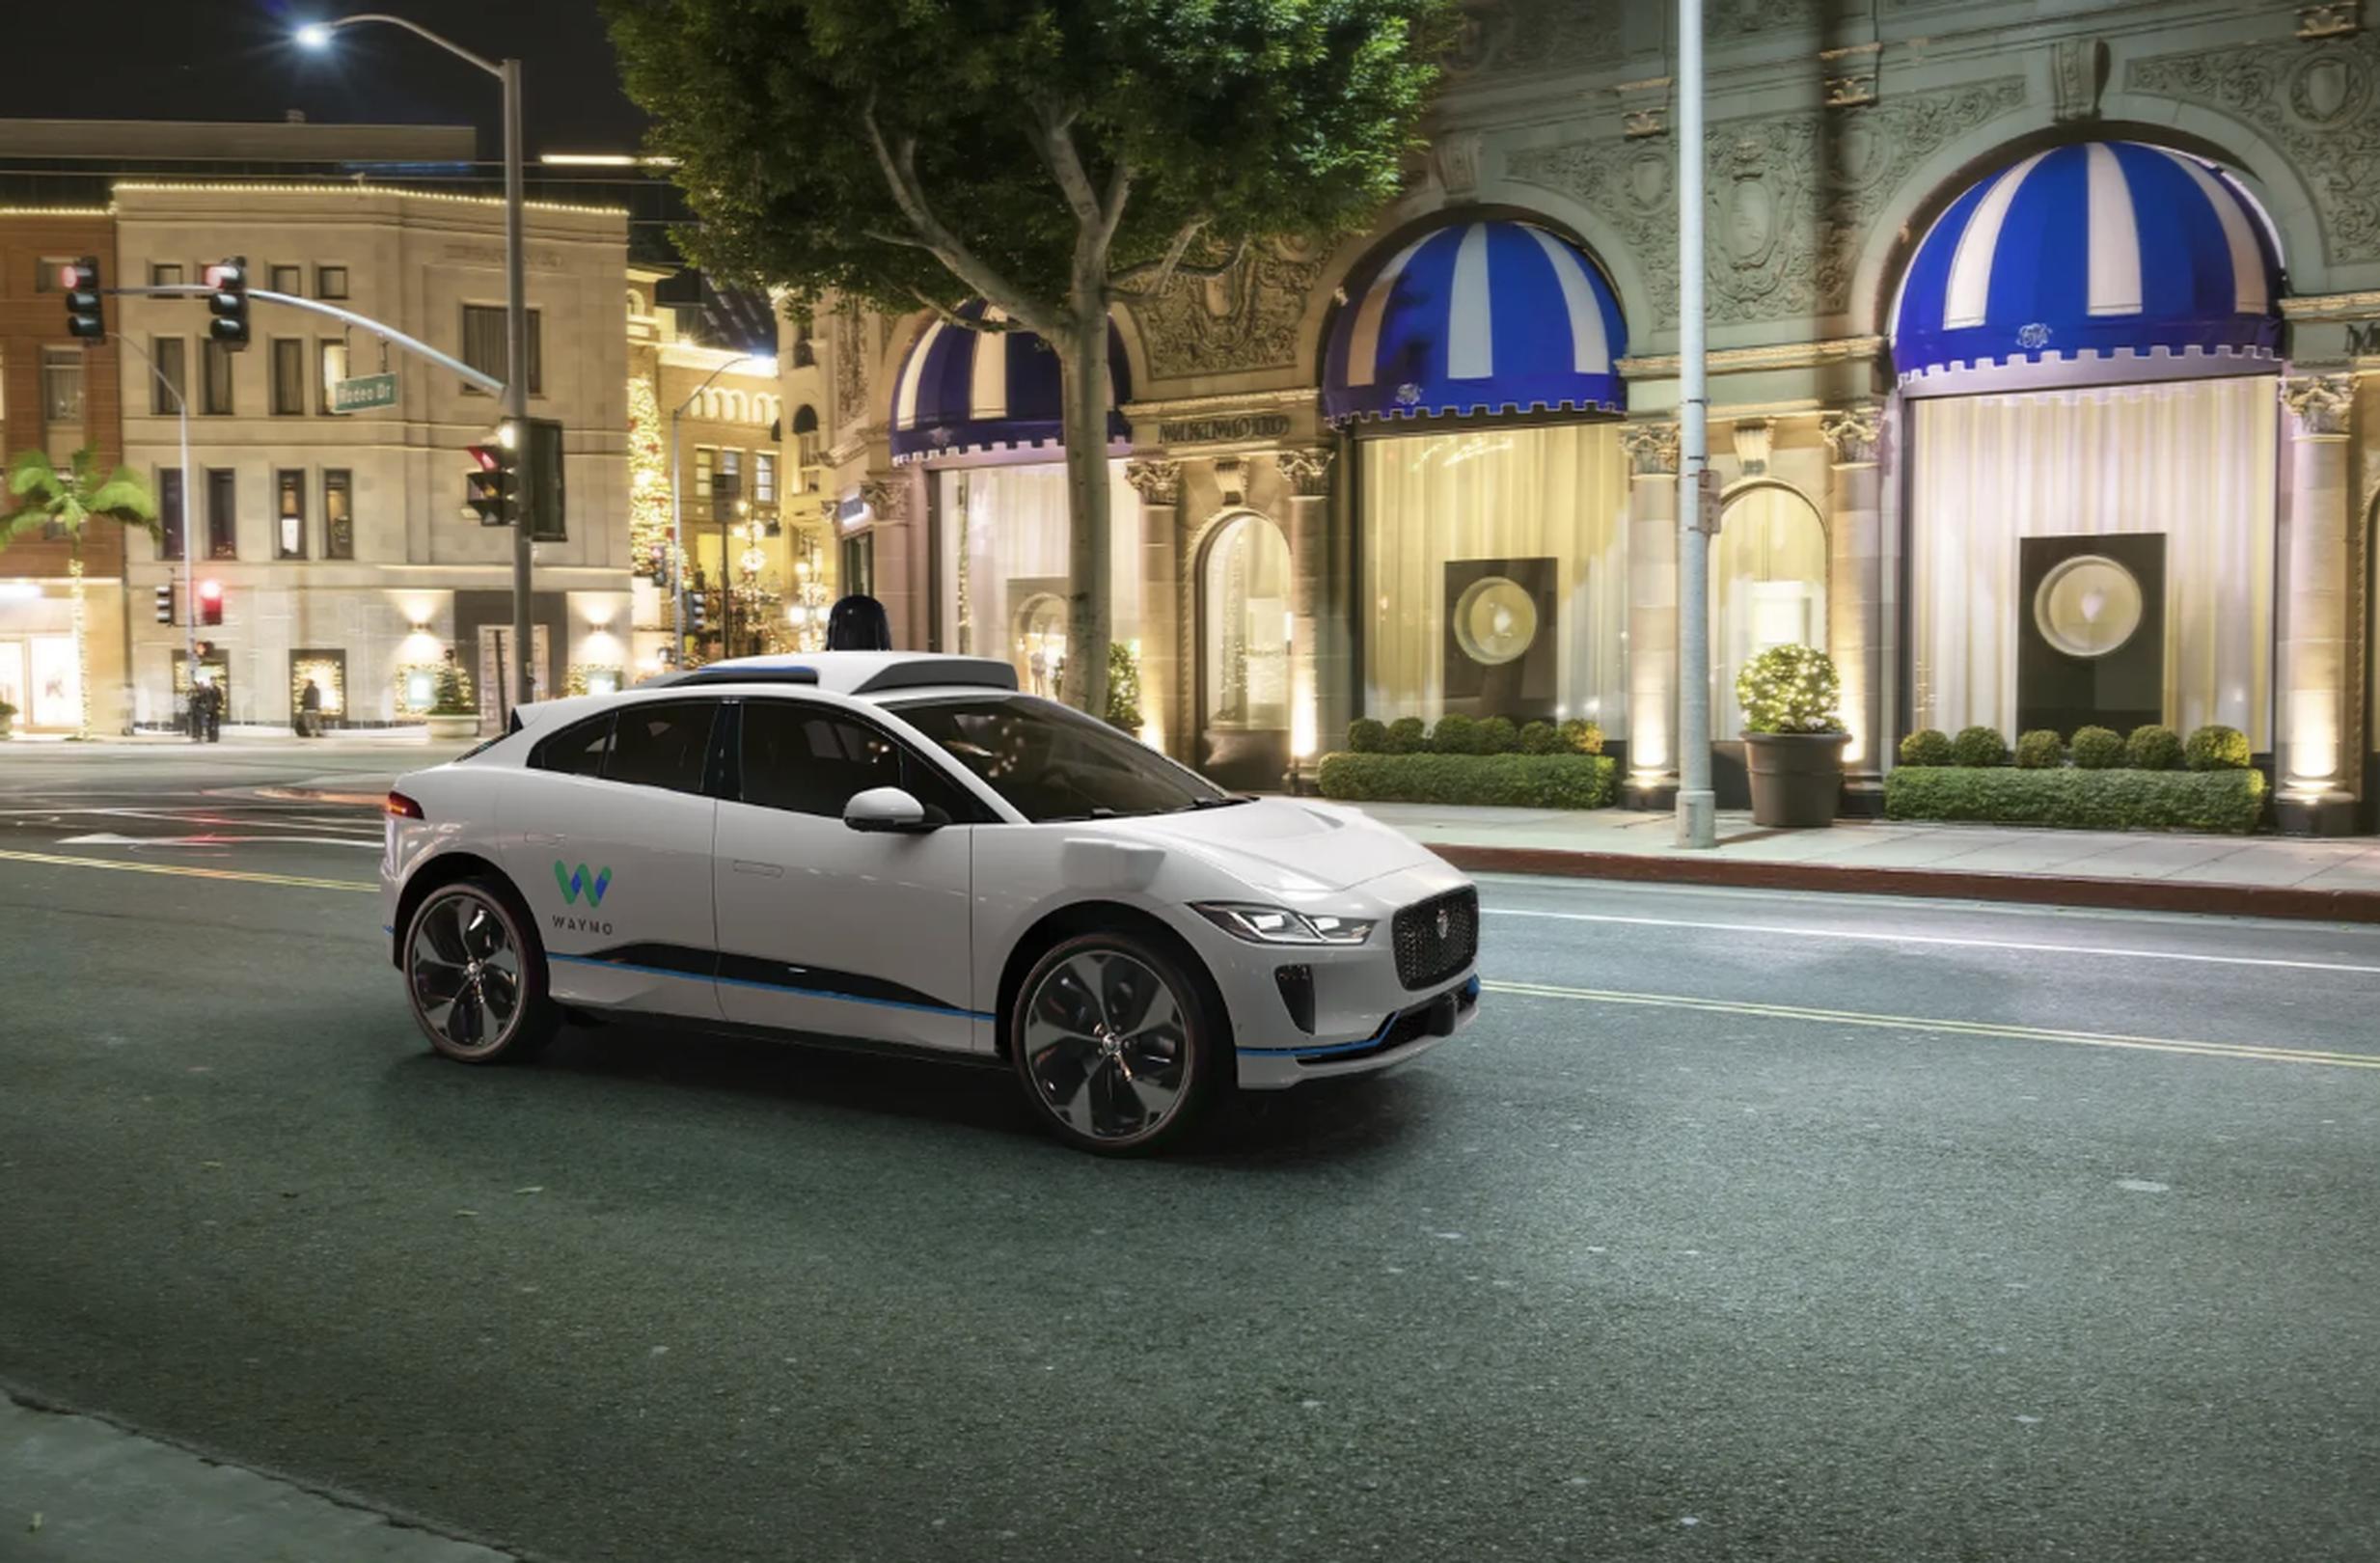 A Jaguar i-Pace being used in AV trials by Waymo